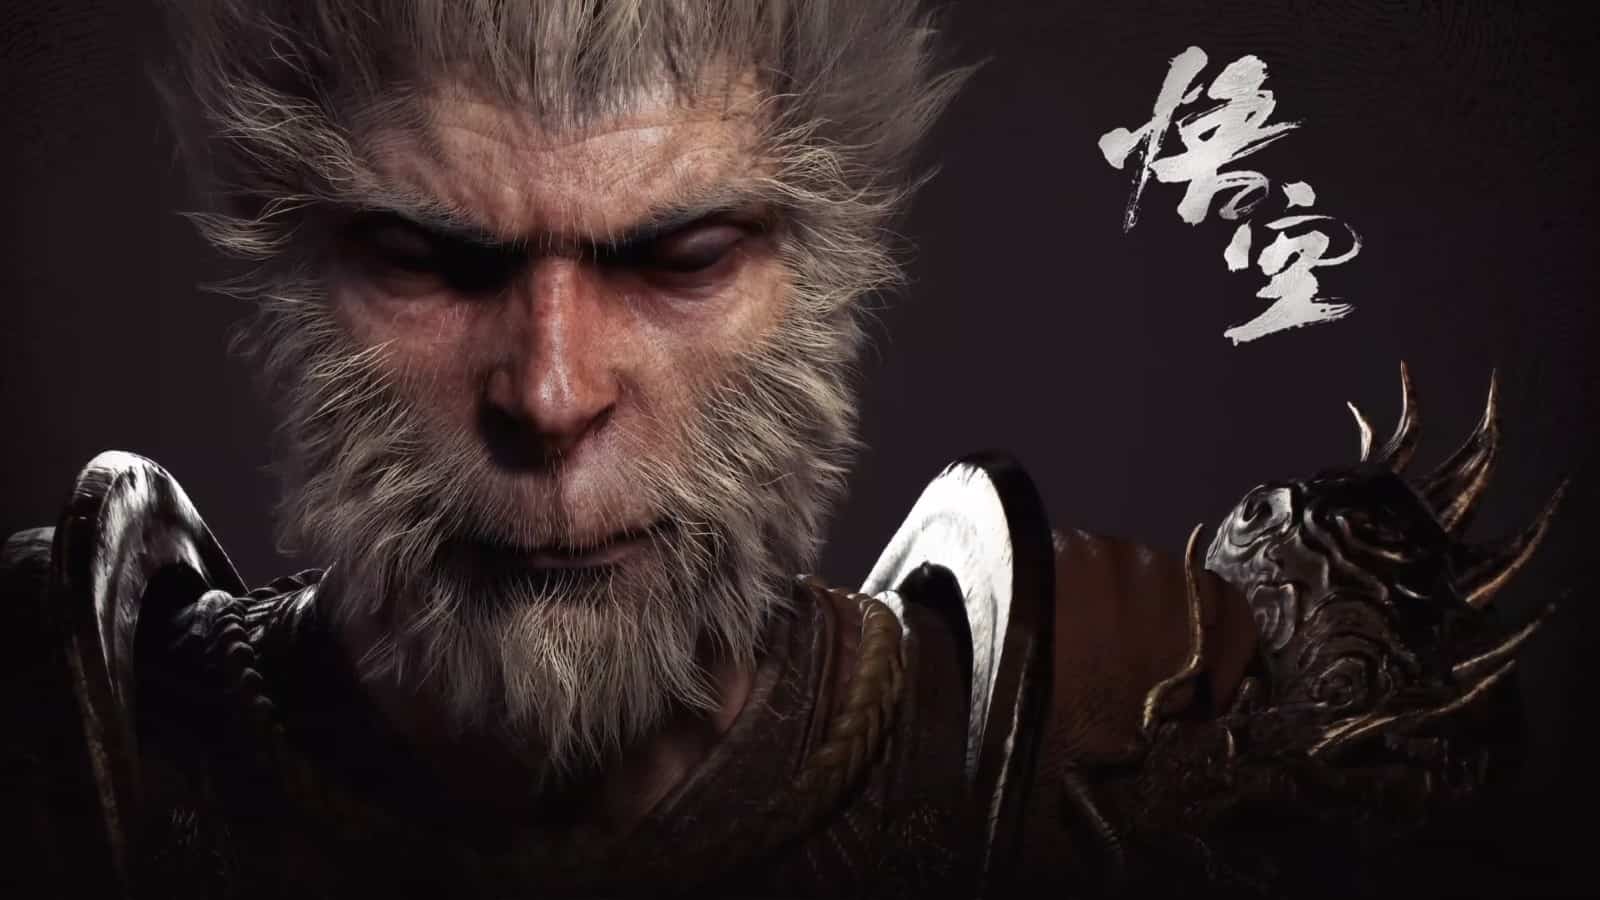 What Is Black Myth Wukong About?